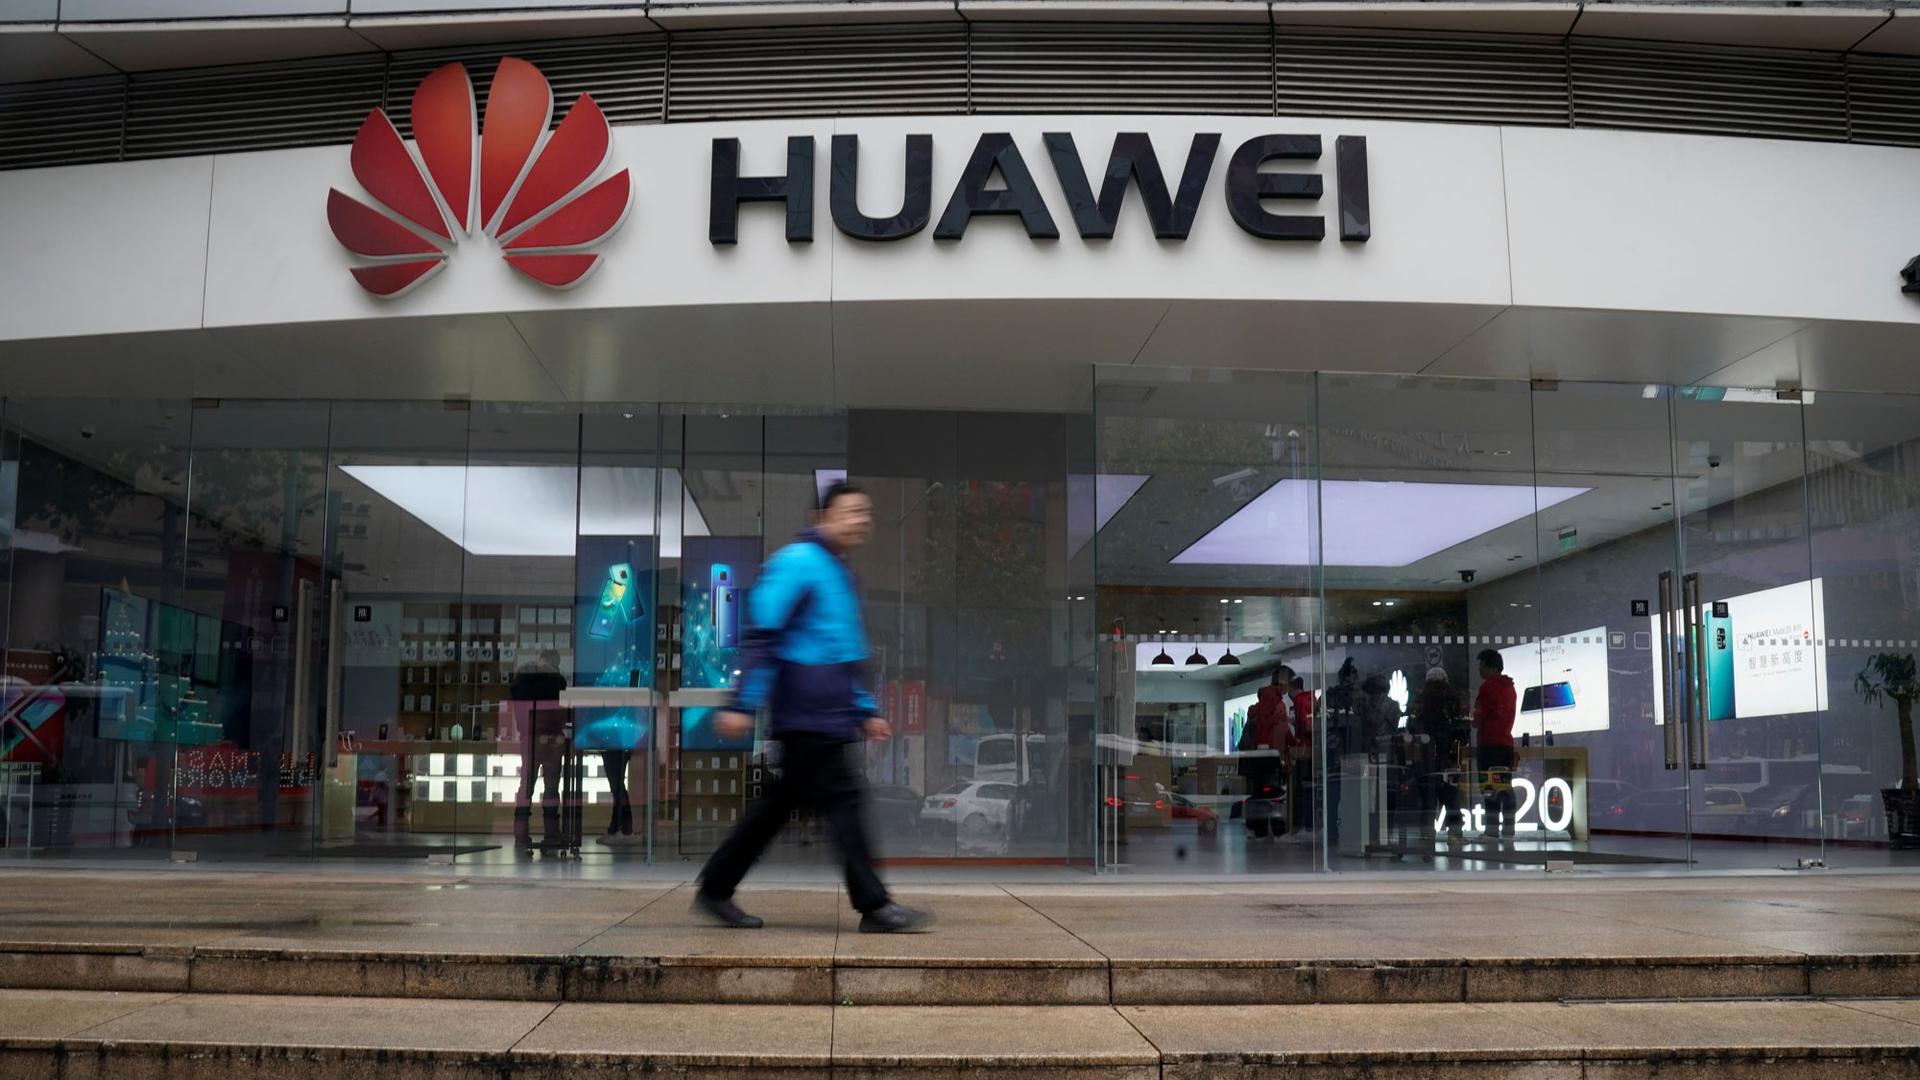 A man is shown walking by the red Huawei logo in a motion blur at a shopping mall in Shanghai, China.